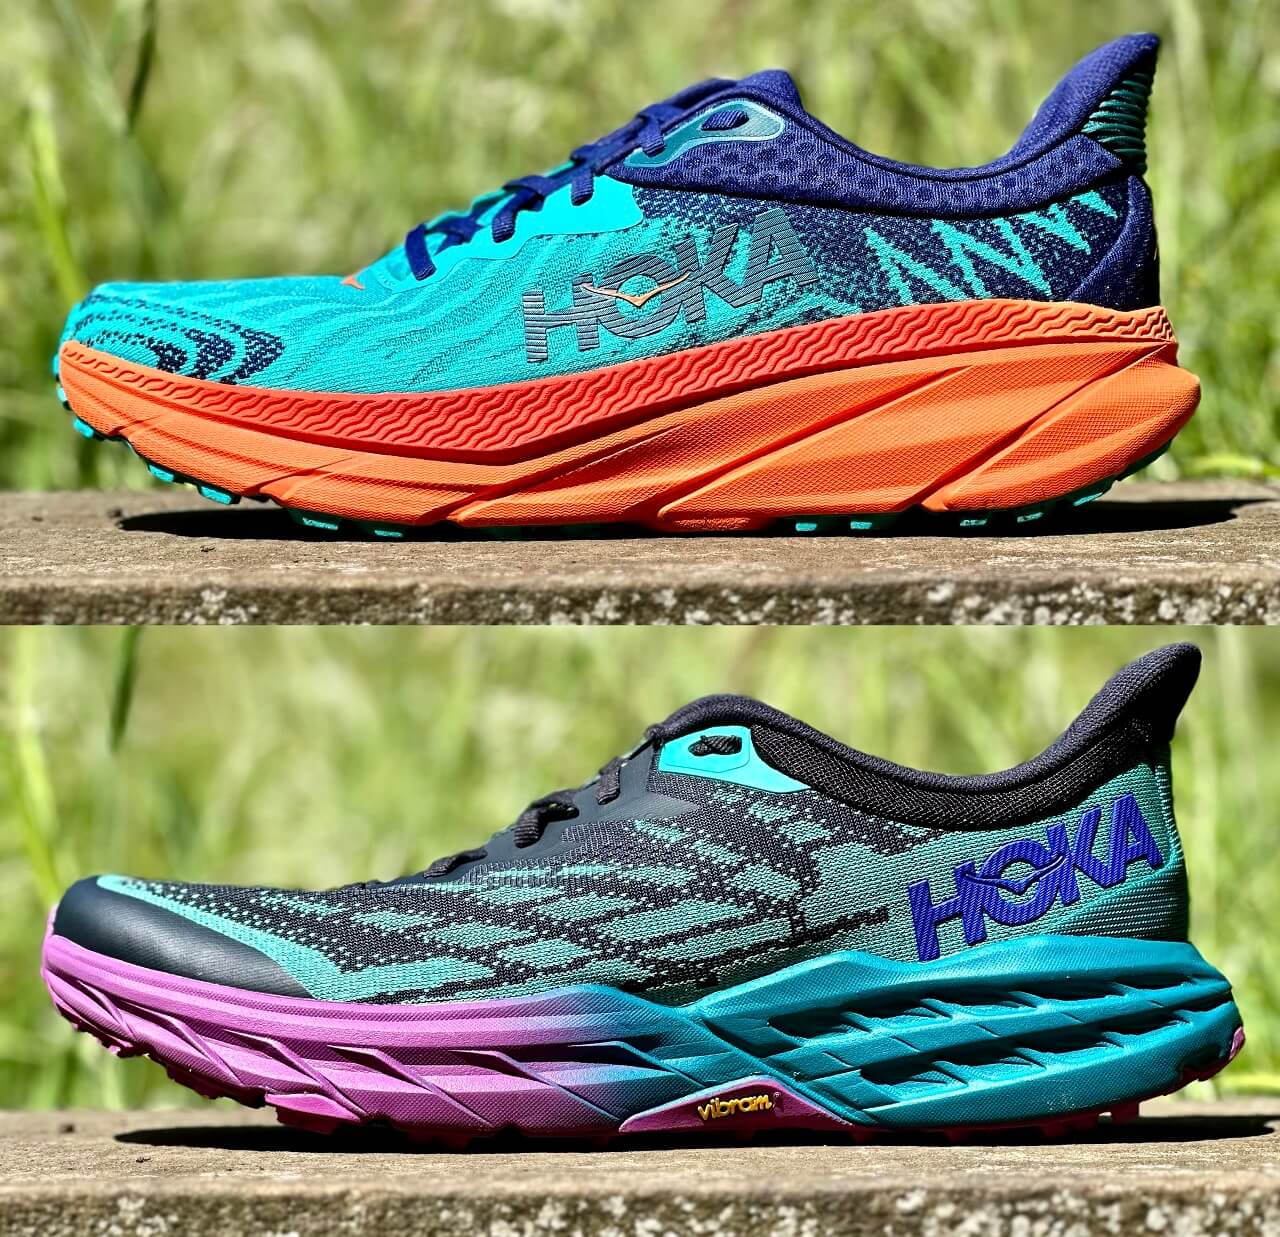 Lateral view of HOKA Challenger and HOKA Speedgoat trail running shoes side by side